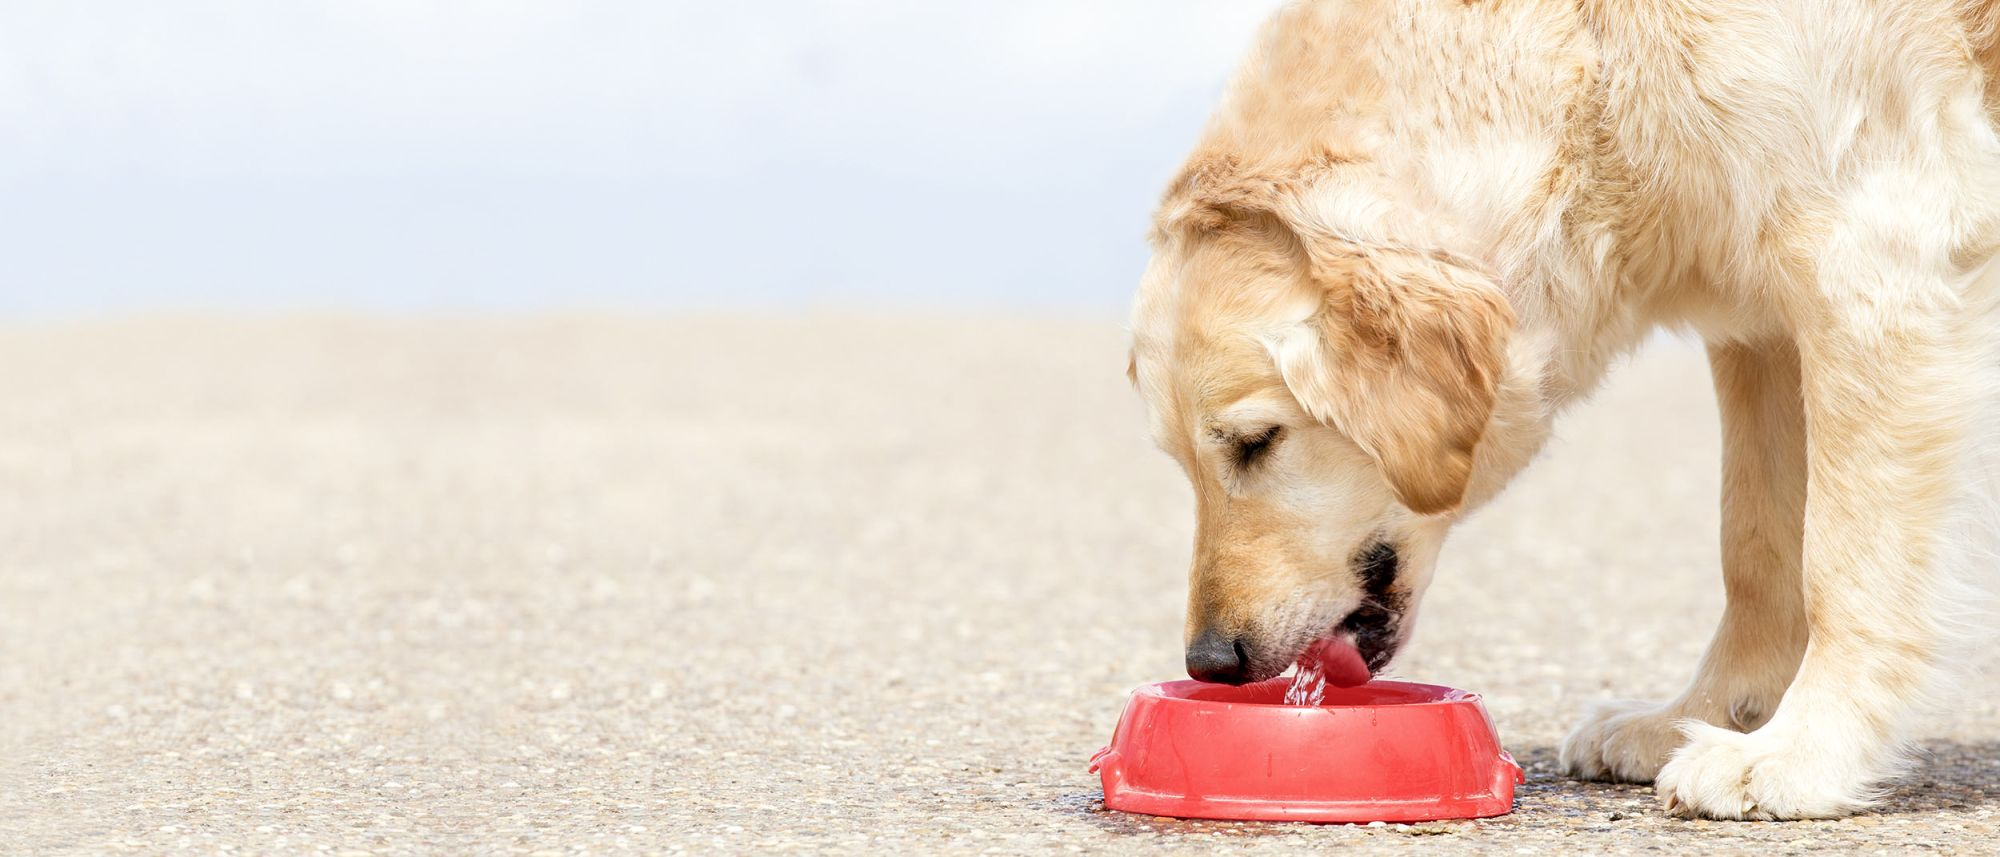 Adult Golden Retriever standing outdoors eating from a red bowl